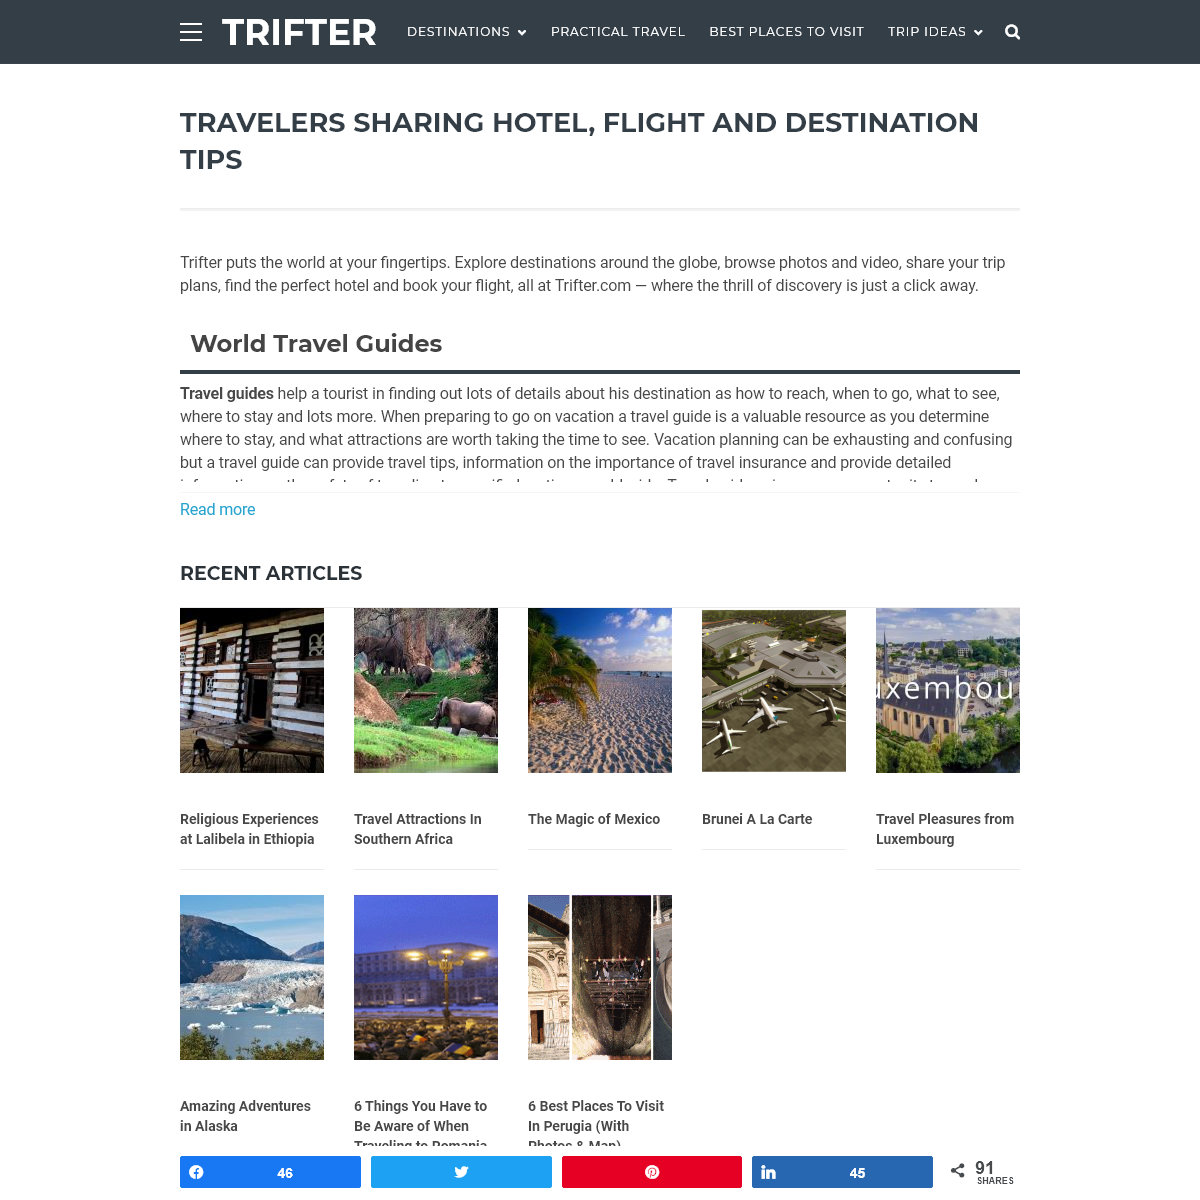 Travelers Sharing Hotel, Flight and Destination Tips - Trifter